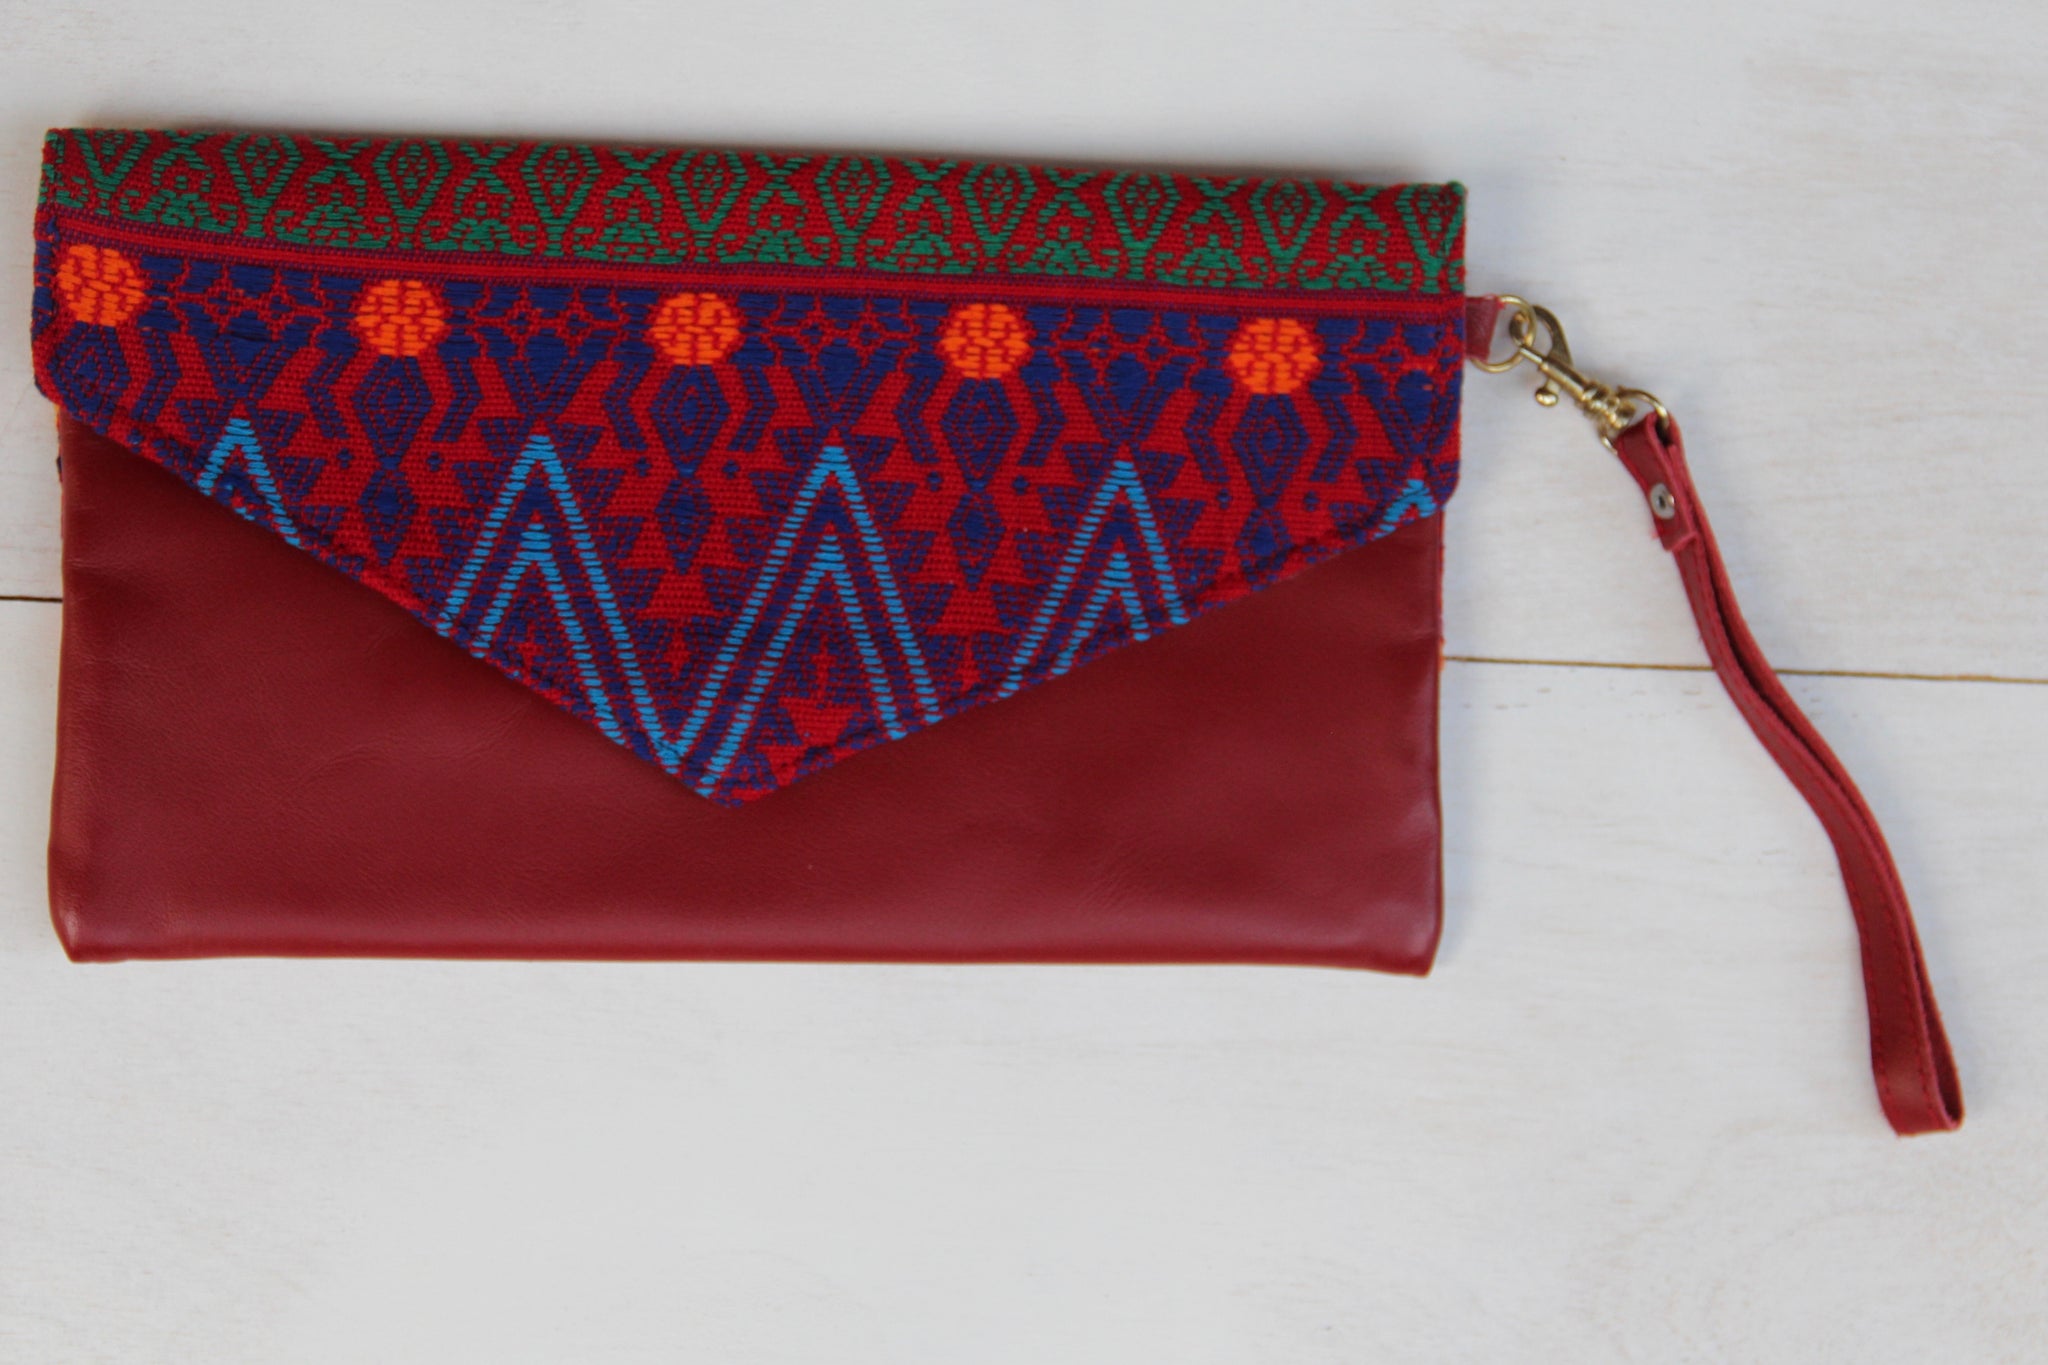 Red Leather Clutch